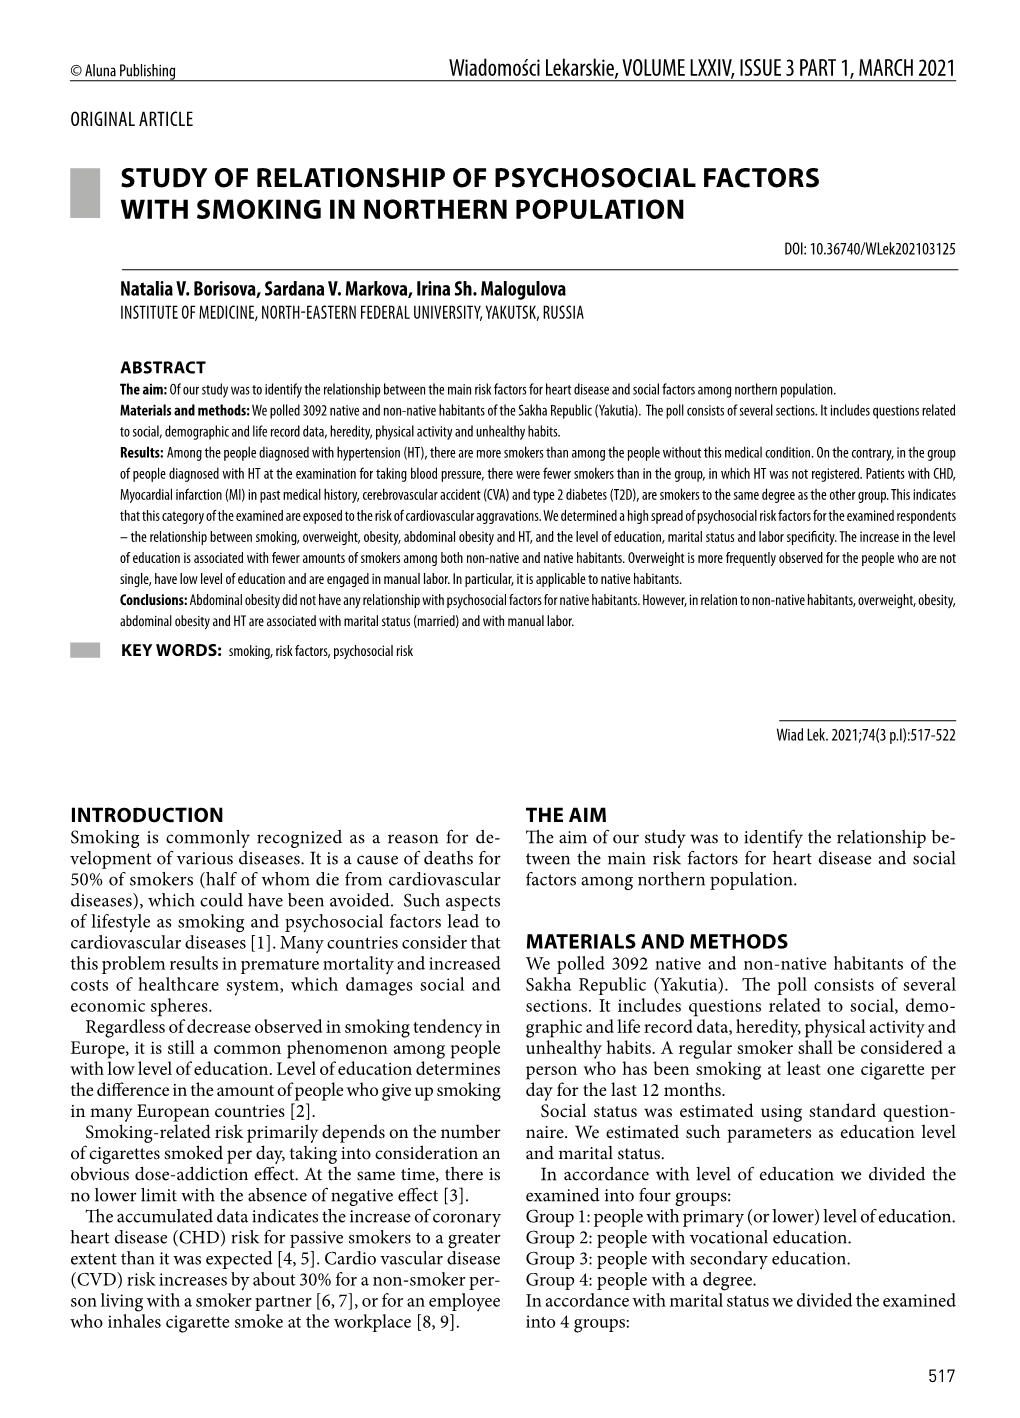 STUDY of RELATIONSHIP of PSYCHOSOCIAL FACTORS with SMOKING in NORTHERN POPULATION DOI: 10.36740/Wlek202103125